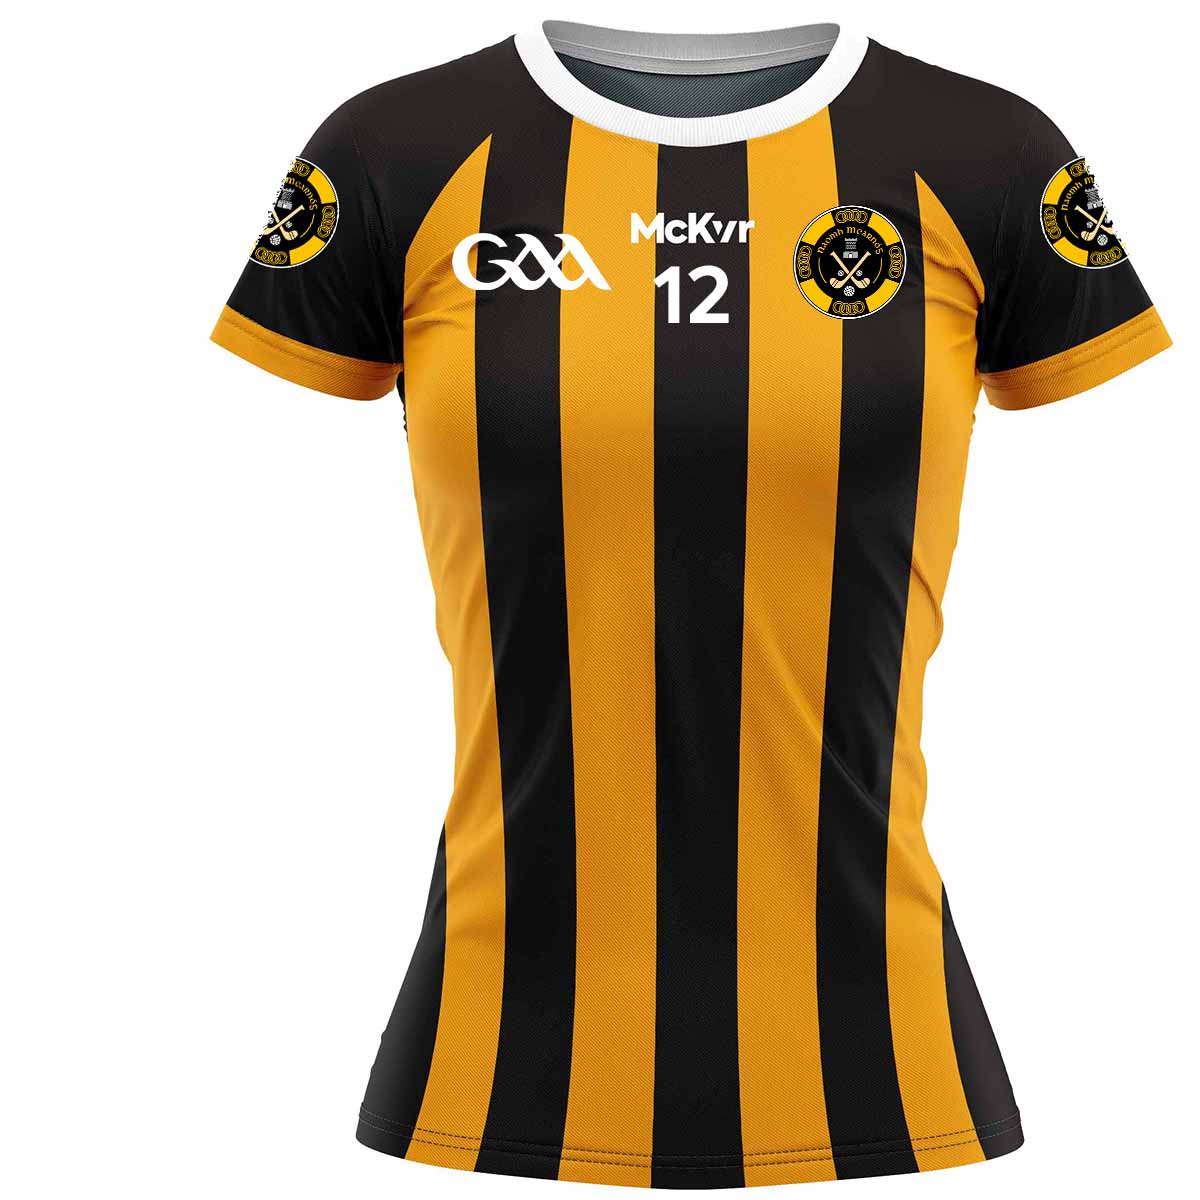 Mc Keever Naomh Mearnog CLG Numbered Playing Jersey - Womens - Black/Amber